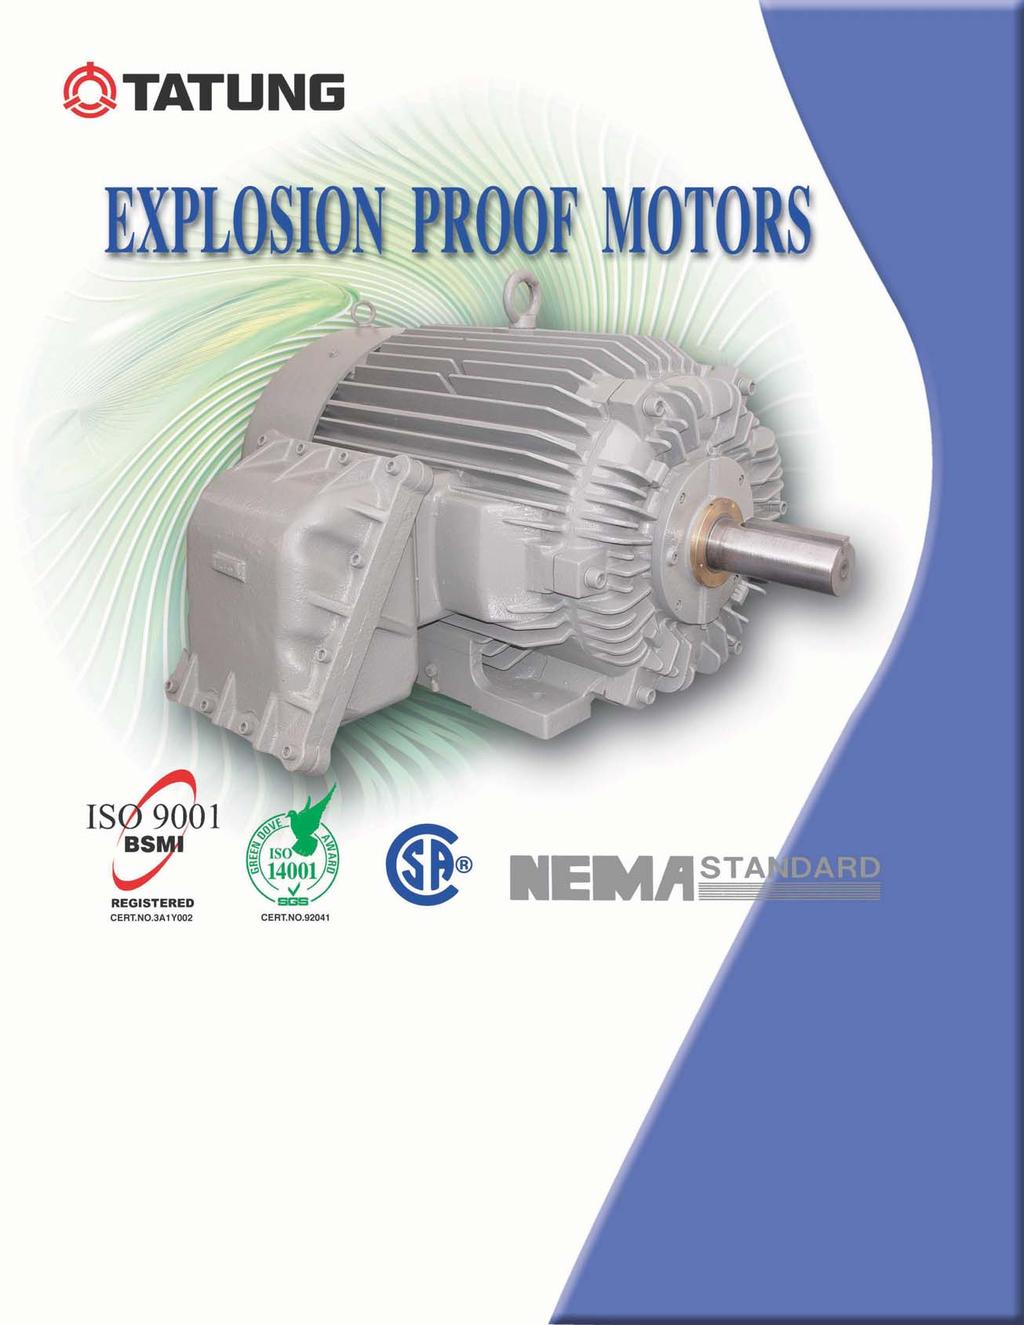 Frames 143T~447TZ Horizontal Totally-Enclosed Fan-Cooled Explosion Proof Squirrel Cage Induction Motors Hazardous Locations, Div.